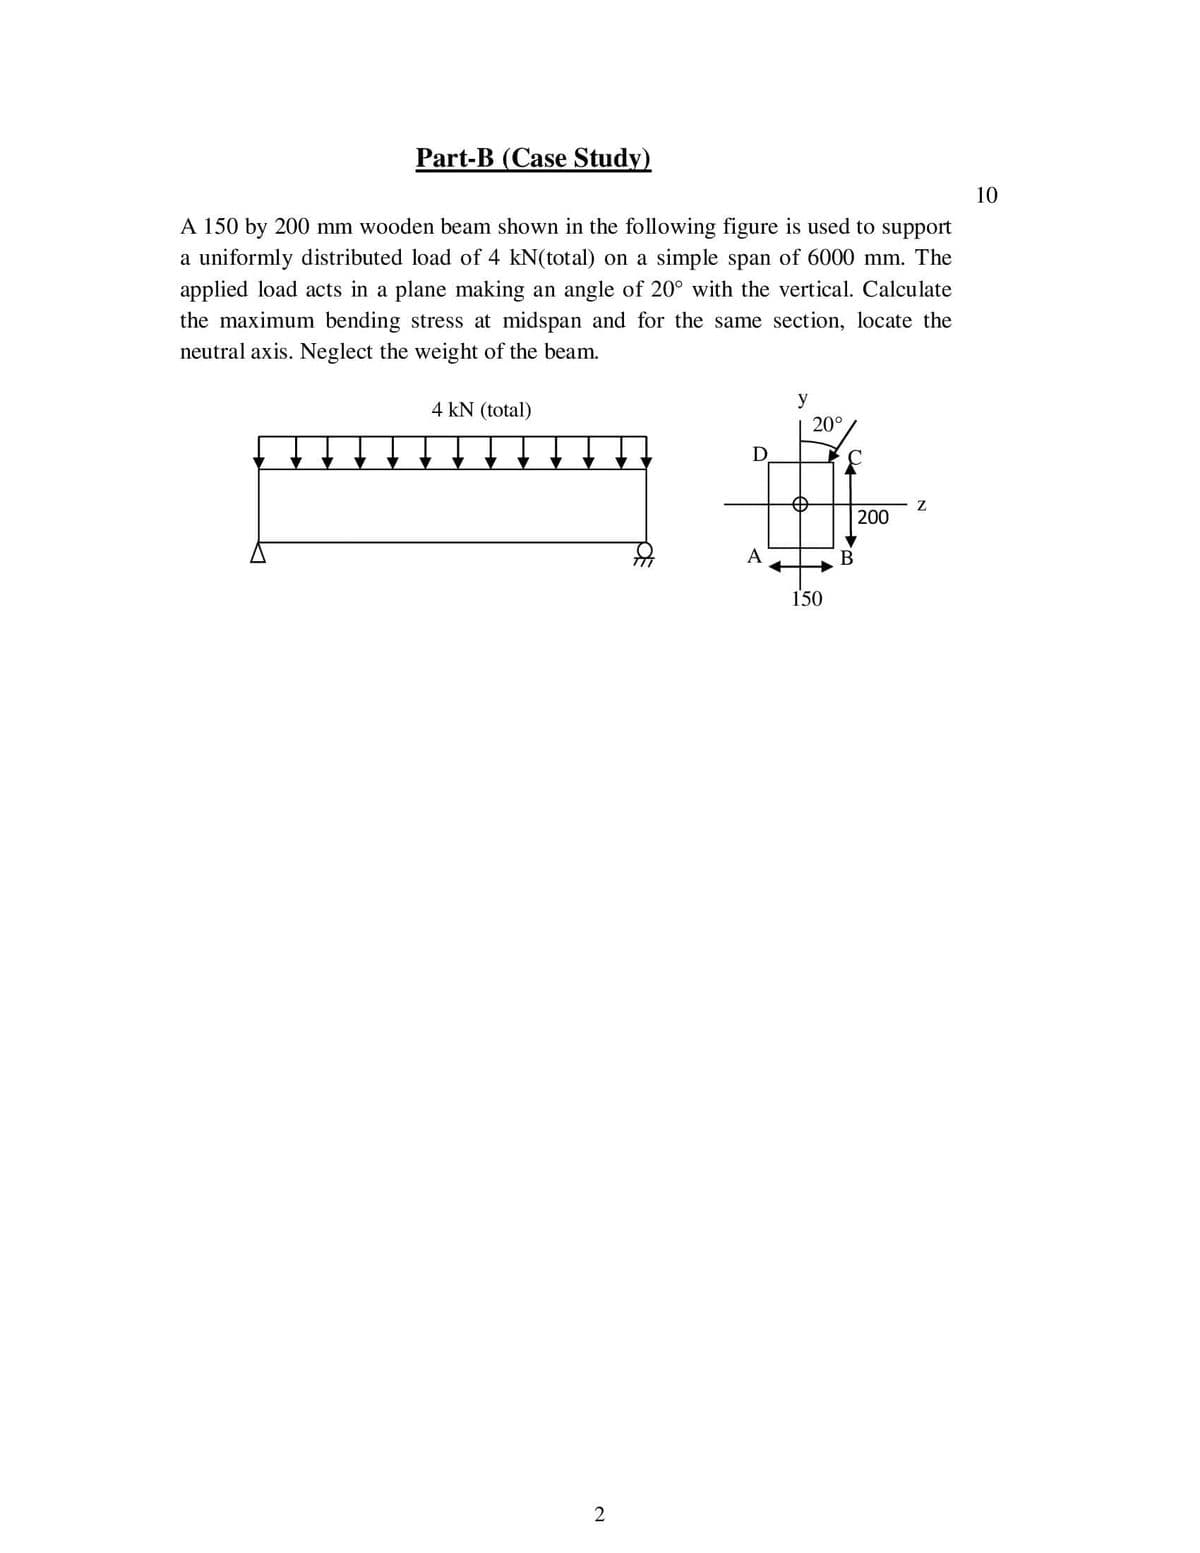 Part-B (Case Study)
10
A 150 by 200 mm wooden beam shown in the following figure is used to support
a uniformly distributed load of 4 kN(total) on a simple span of 6000 mm. The
applied load acts in a plane making an angle of 20° with the vertical. Calculate
the maximum bending stress at midspan and for the same section, locate the
neutral axis. Neglect the weight of the beam.
4 kN (total)
20°
200
В
150
